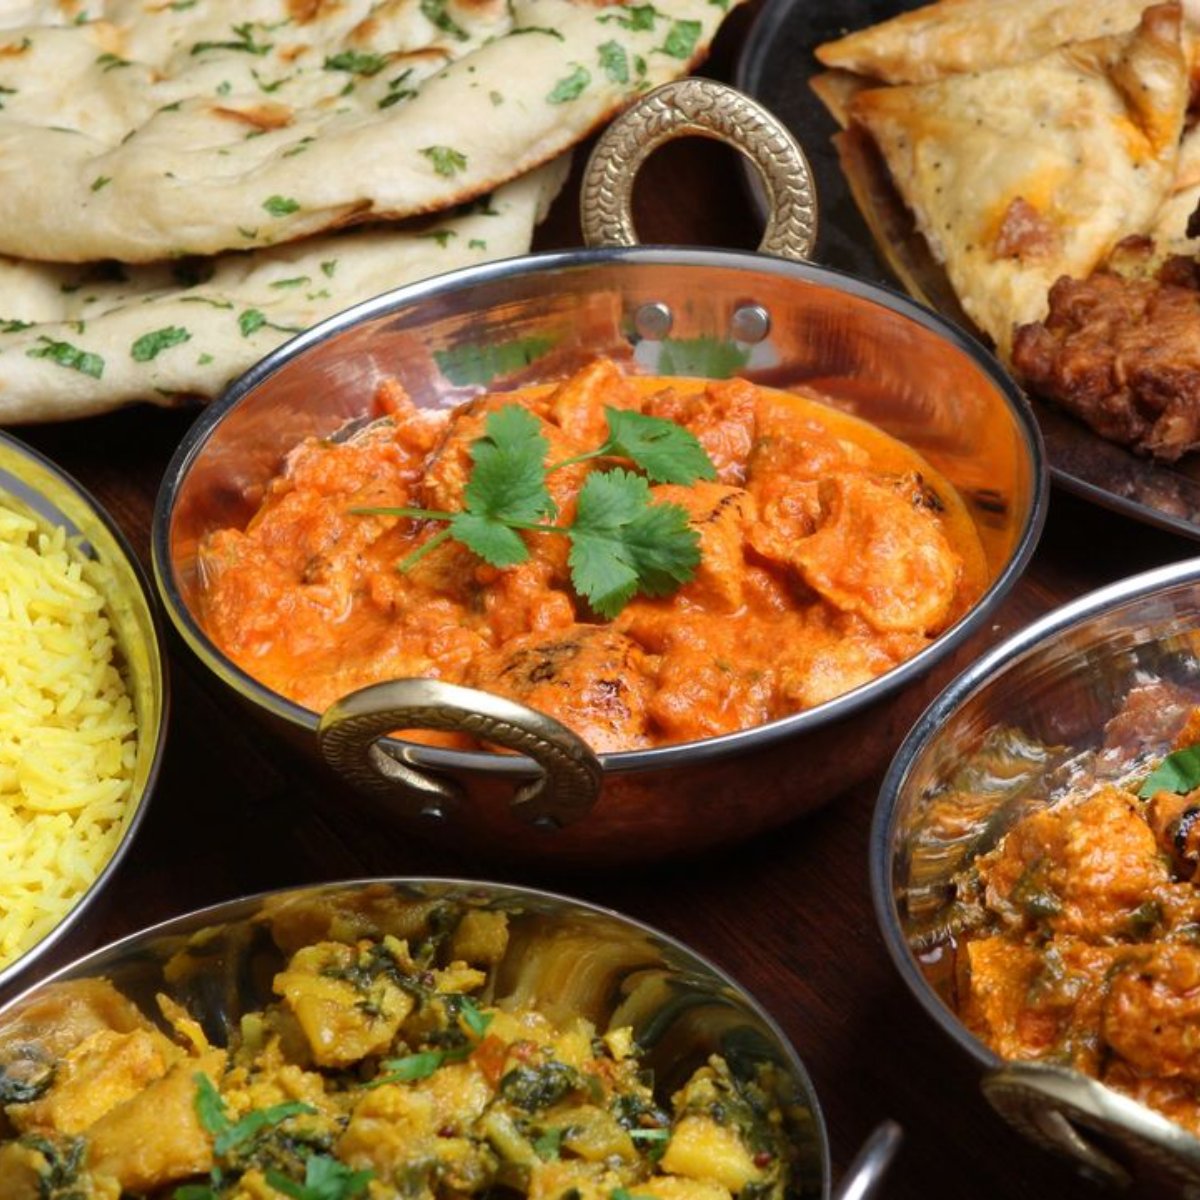 Your year is bound to be excellent when you start things off with a meal at Bollywood Bistro. Tag a friend who should join you this week! #BollywoodBistroGreatFalls #BollywoodBistro #GreatFallsVA #IndianFood #IndianFusion